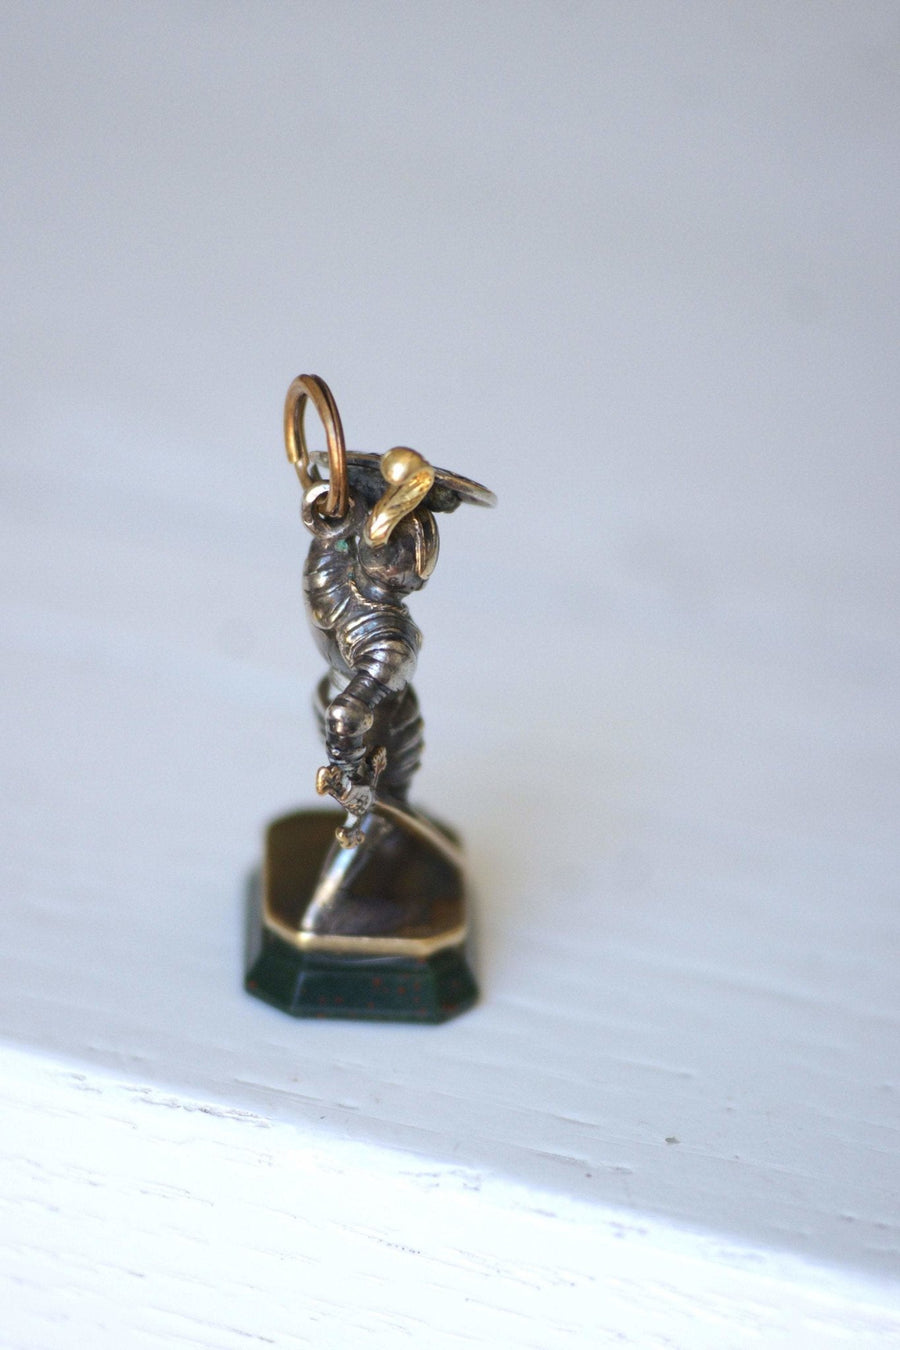 Antique Victorian neo-Gothic knight seal pendant in gold, silver and bloodstone intaglio - Penelope Gallery